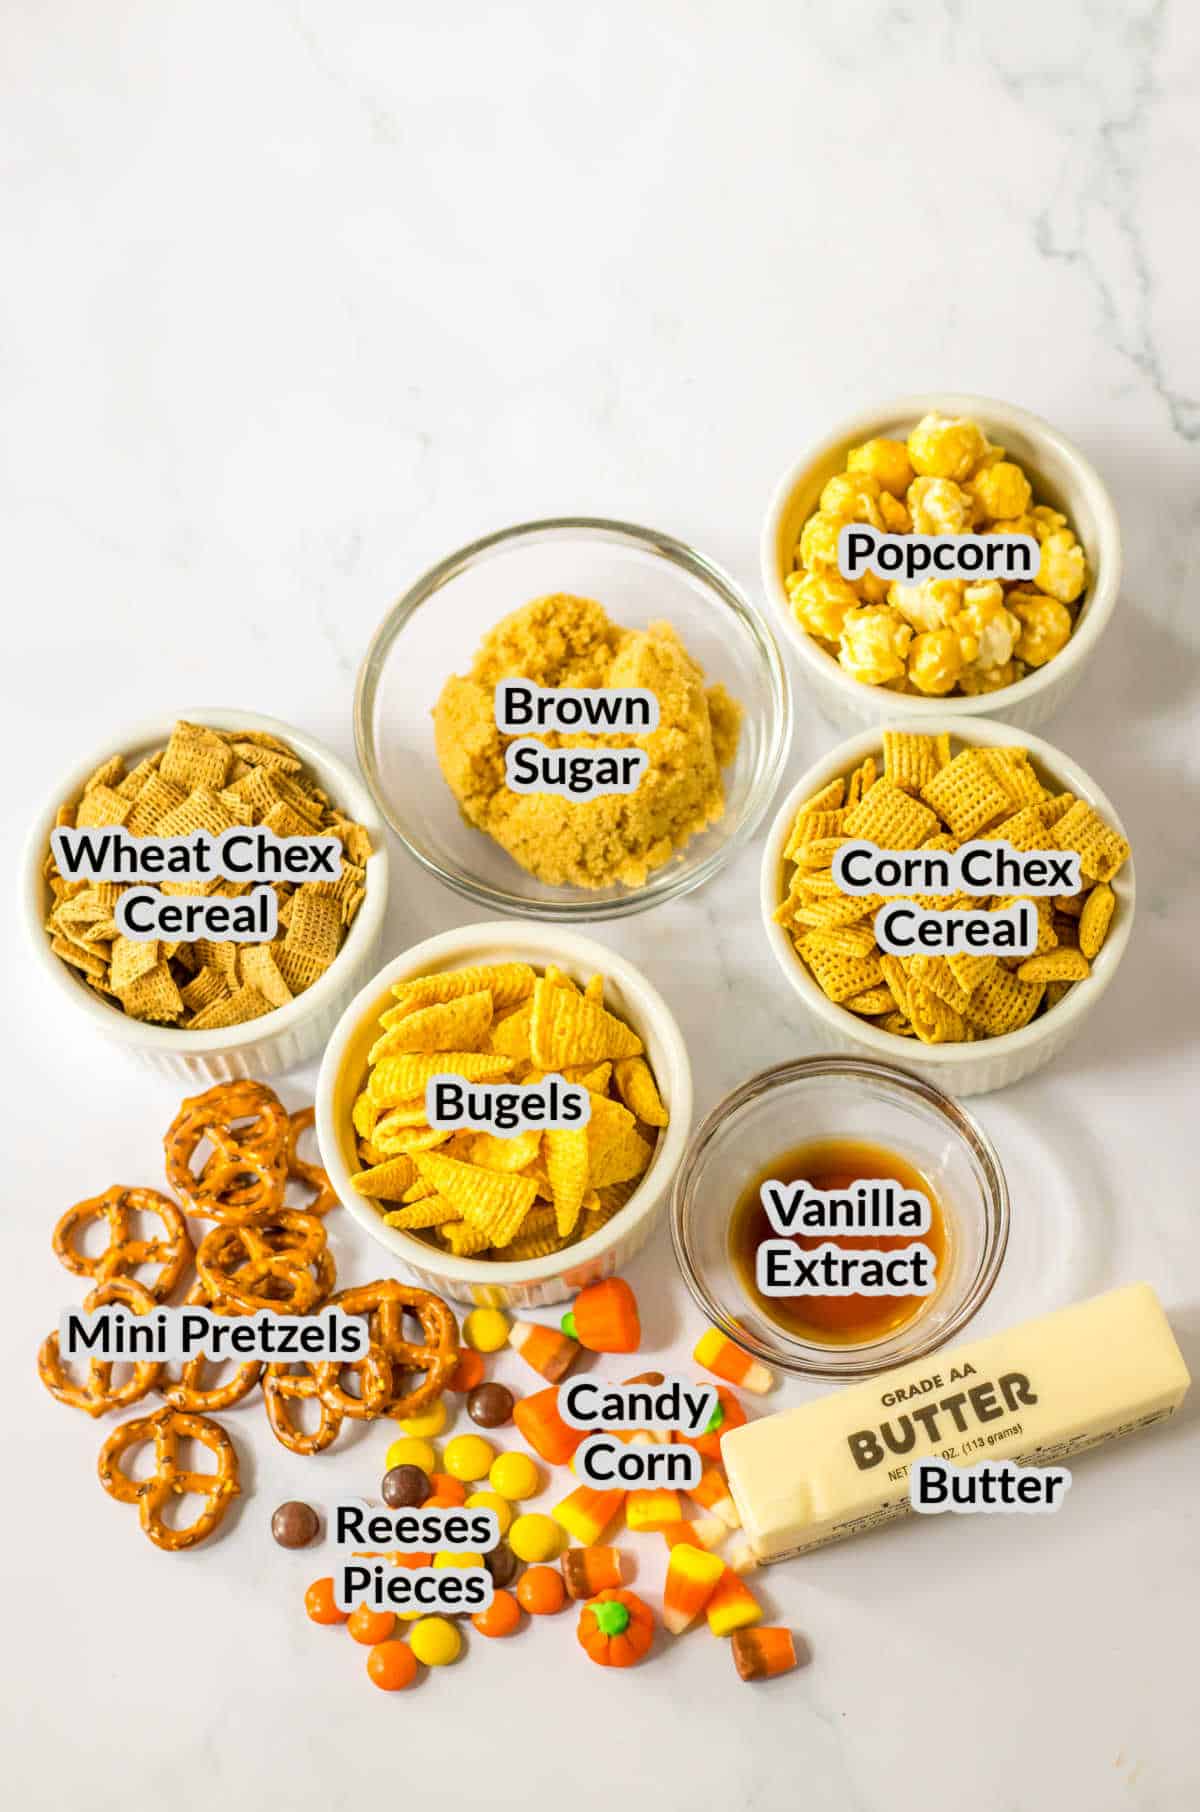 Overhead Image of the Fall Snack Mix Ingredients